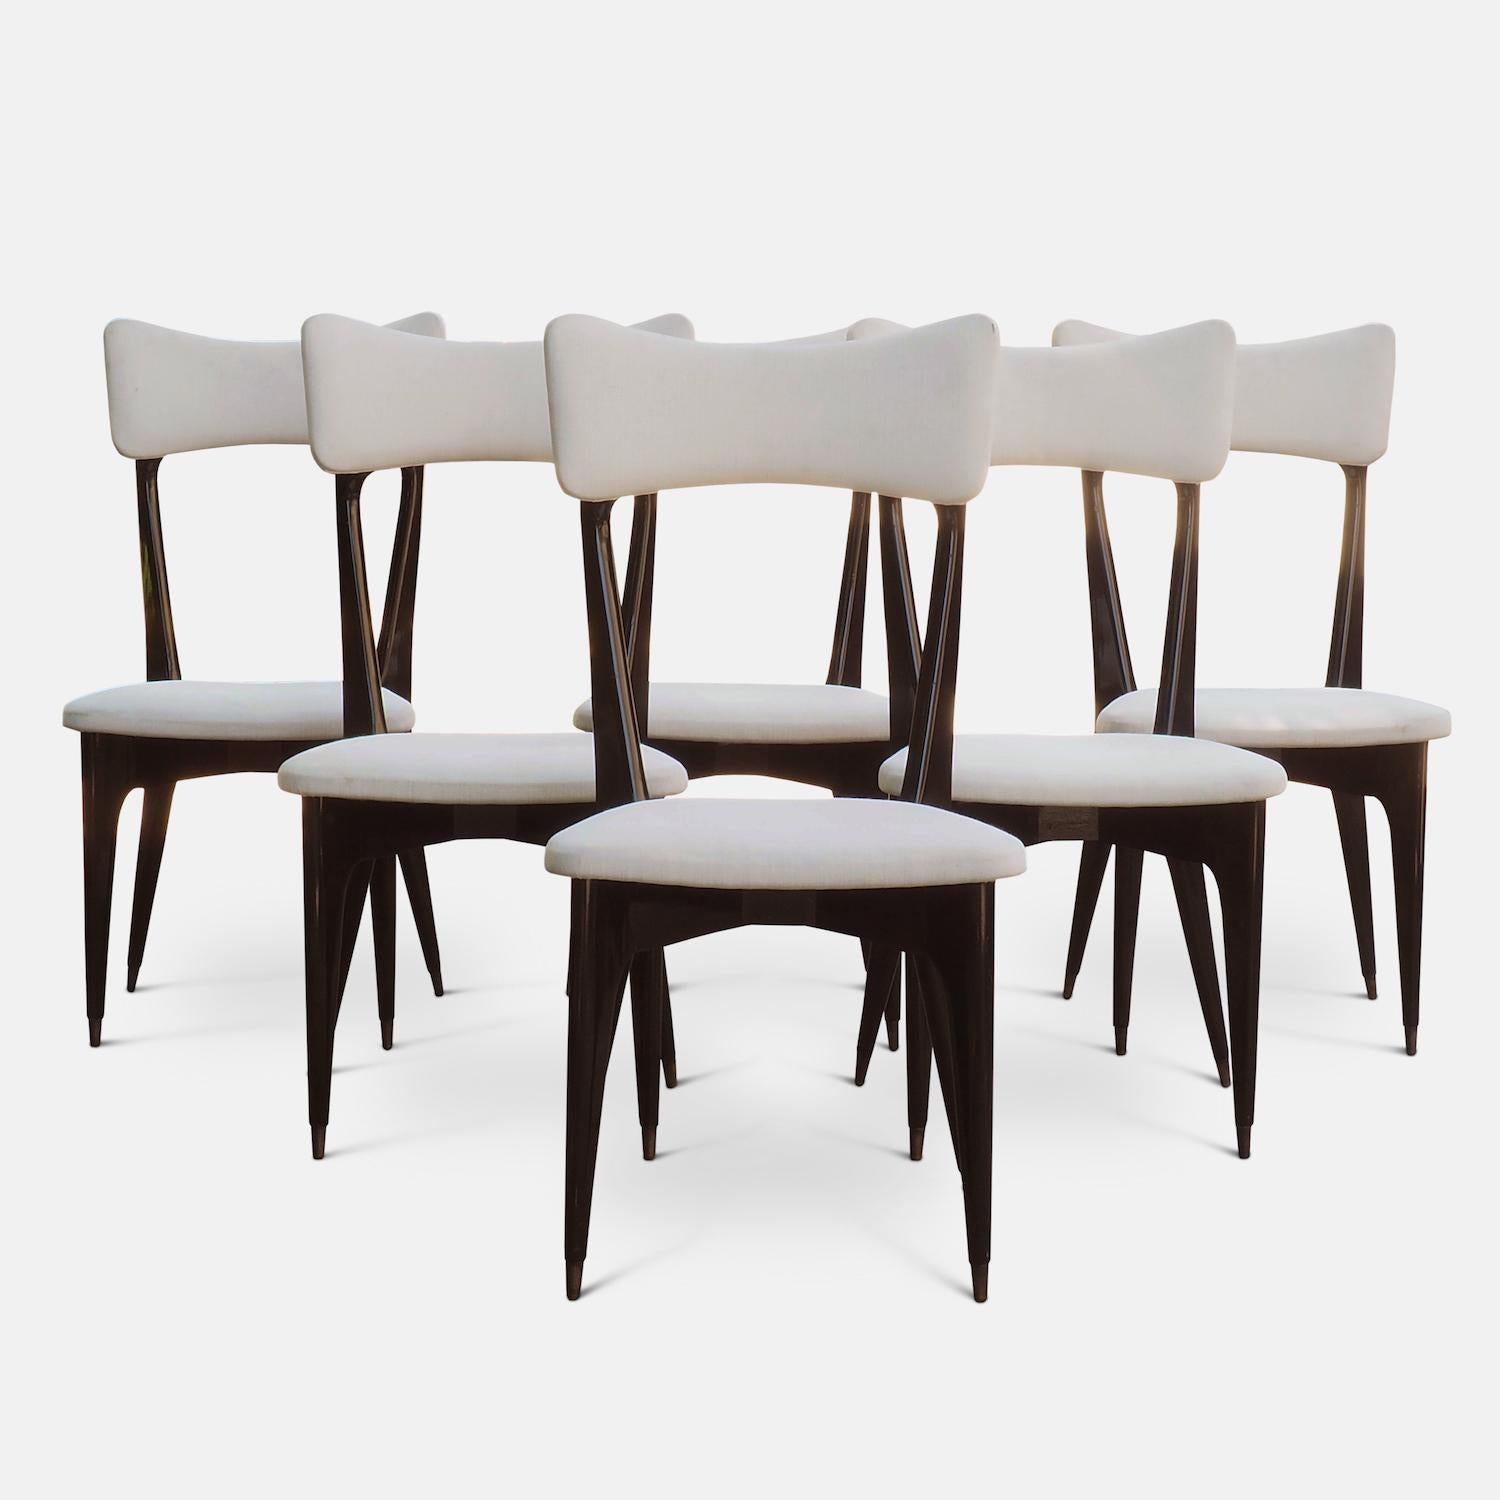 Six ebonized dining chairs attributed to Ico Parisi, of modernist design with characteristic cruciform leg configuration, sculpted wood and bass fittings.

Literature: A similar example p. 196 Ico Paris Catalogue Raisonne 1936-1960 Roberta Lietti